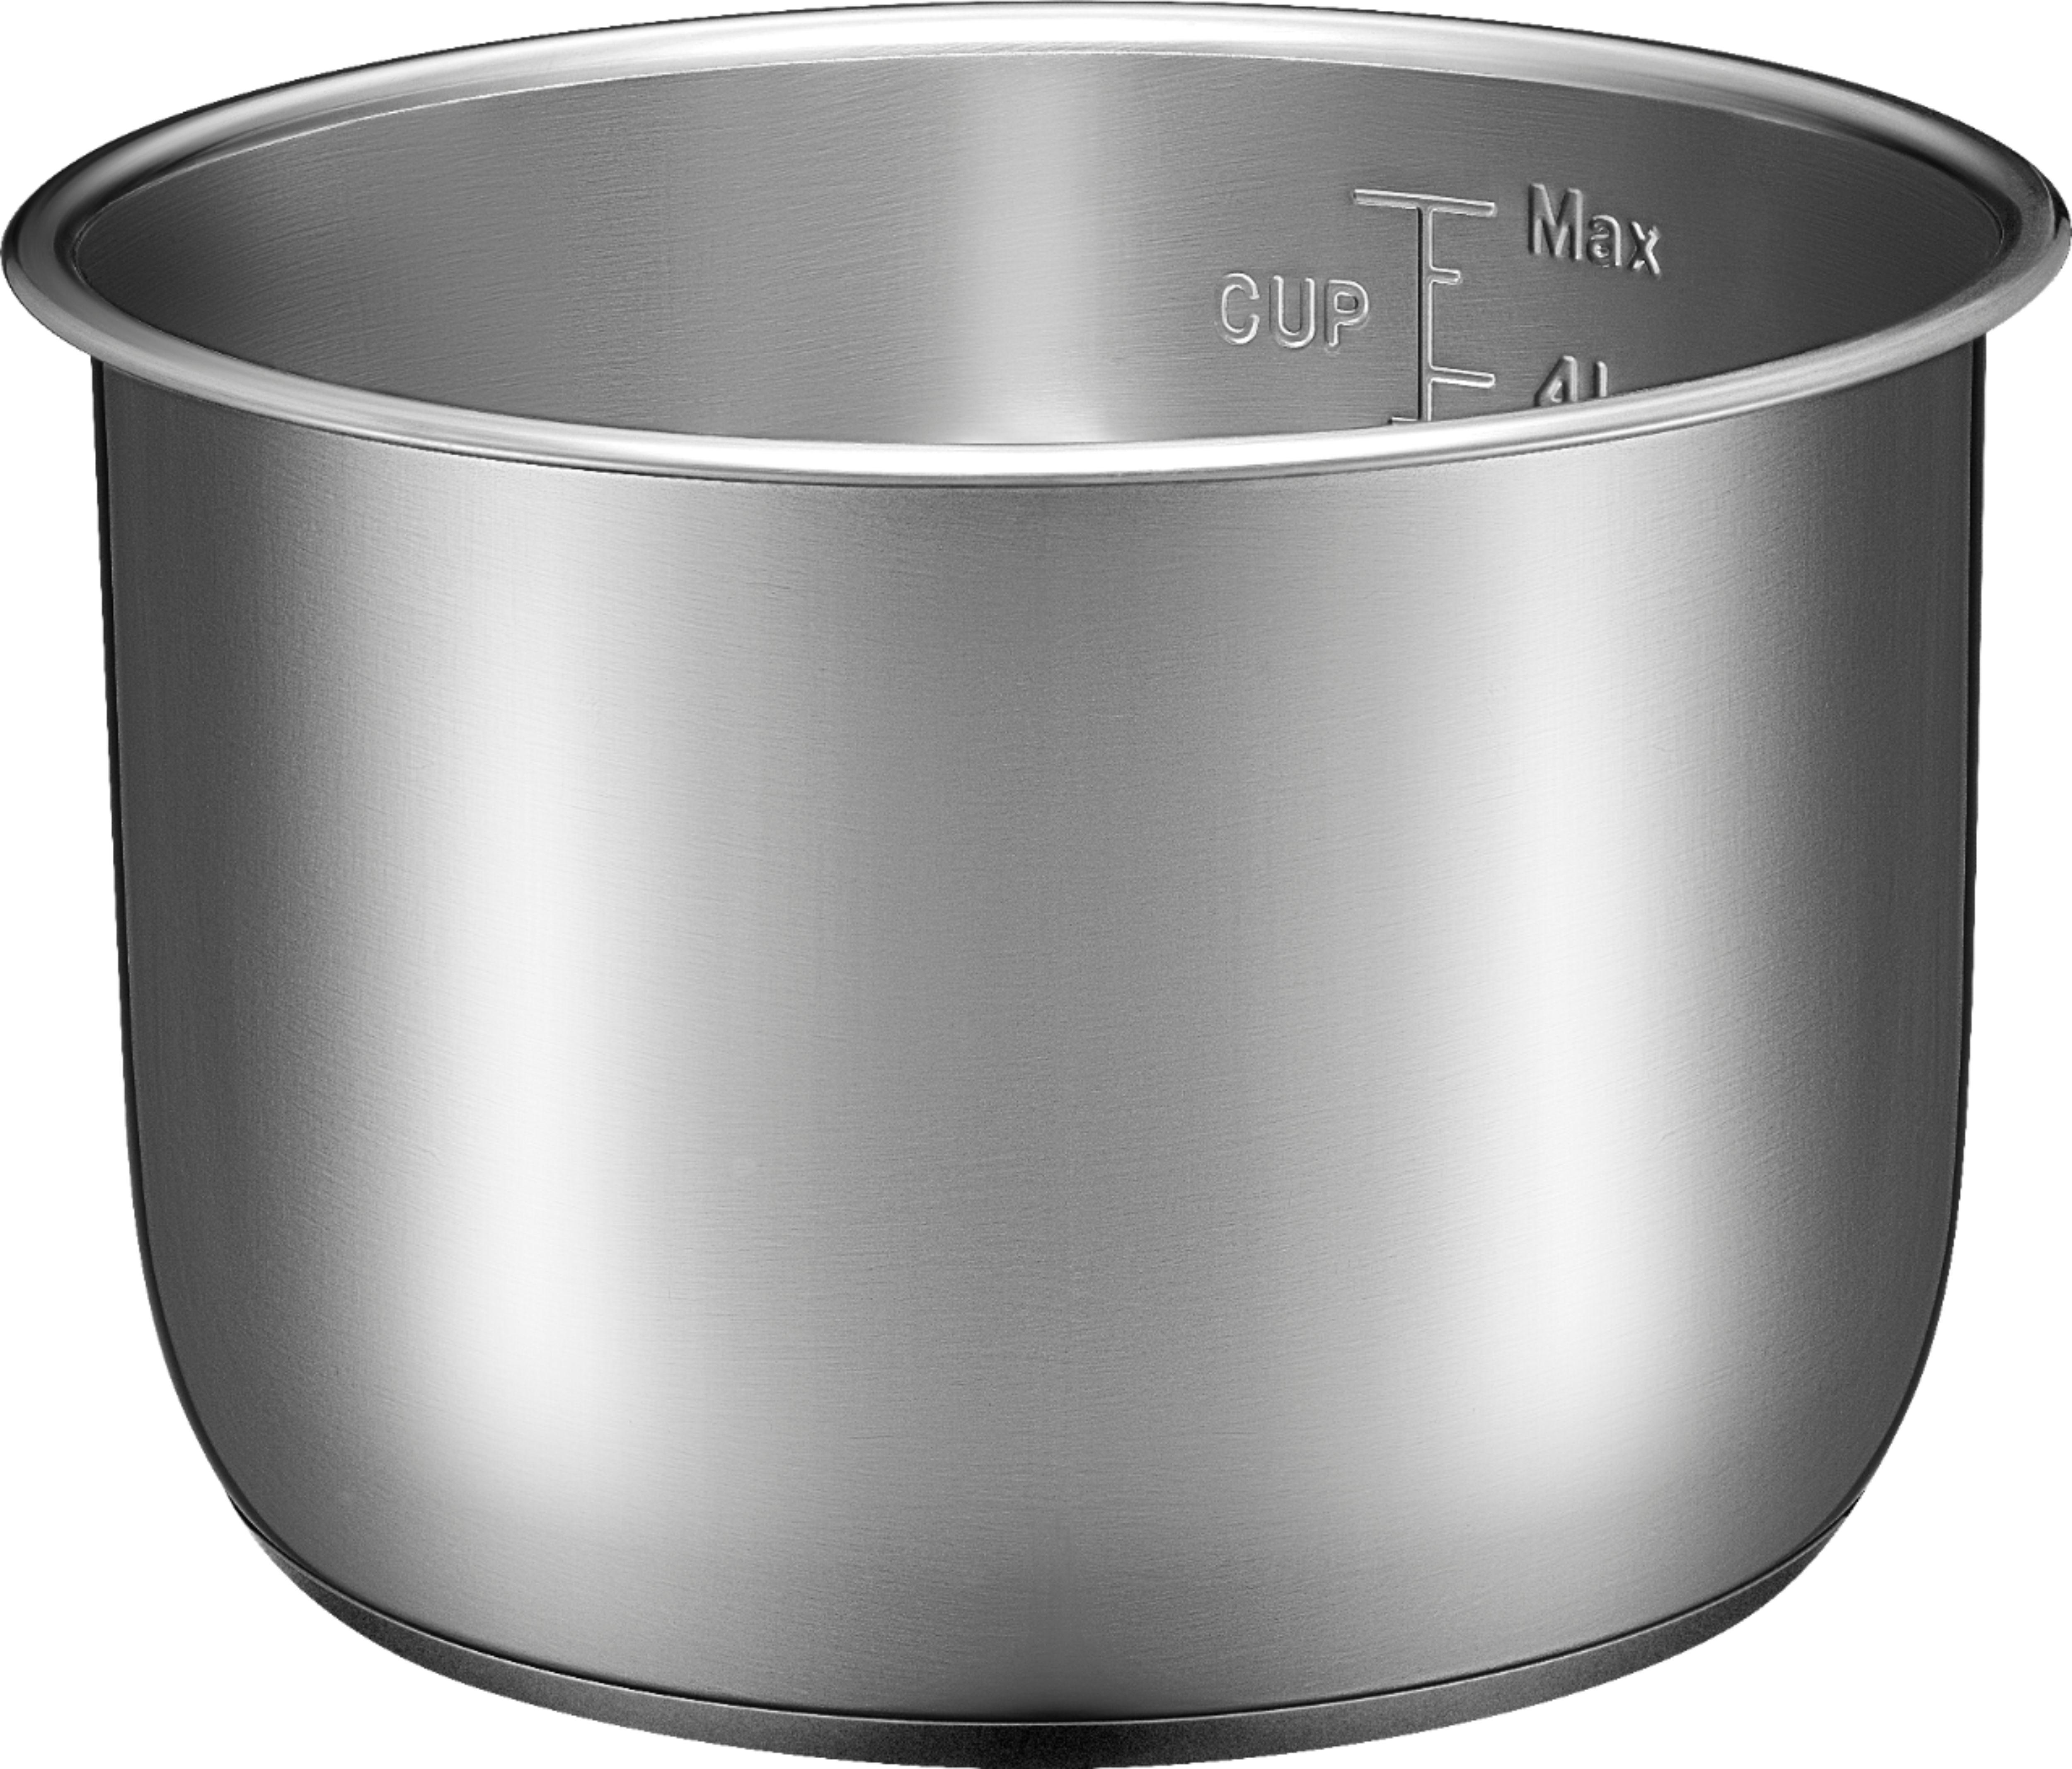 aroma rice cooker stainless steel pot